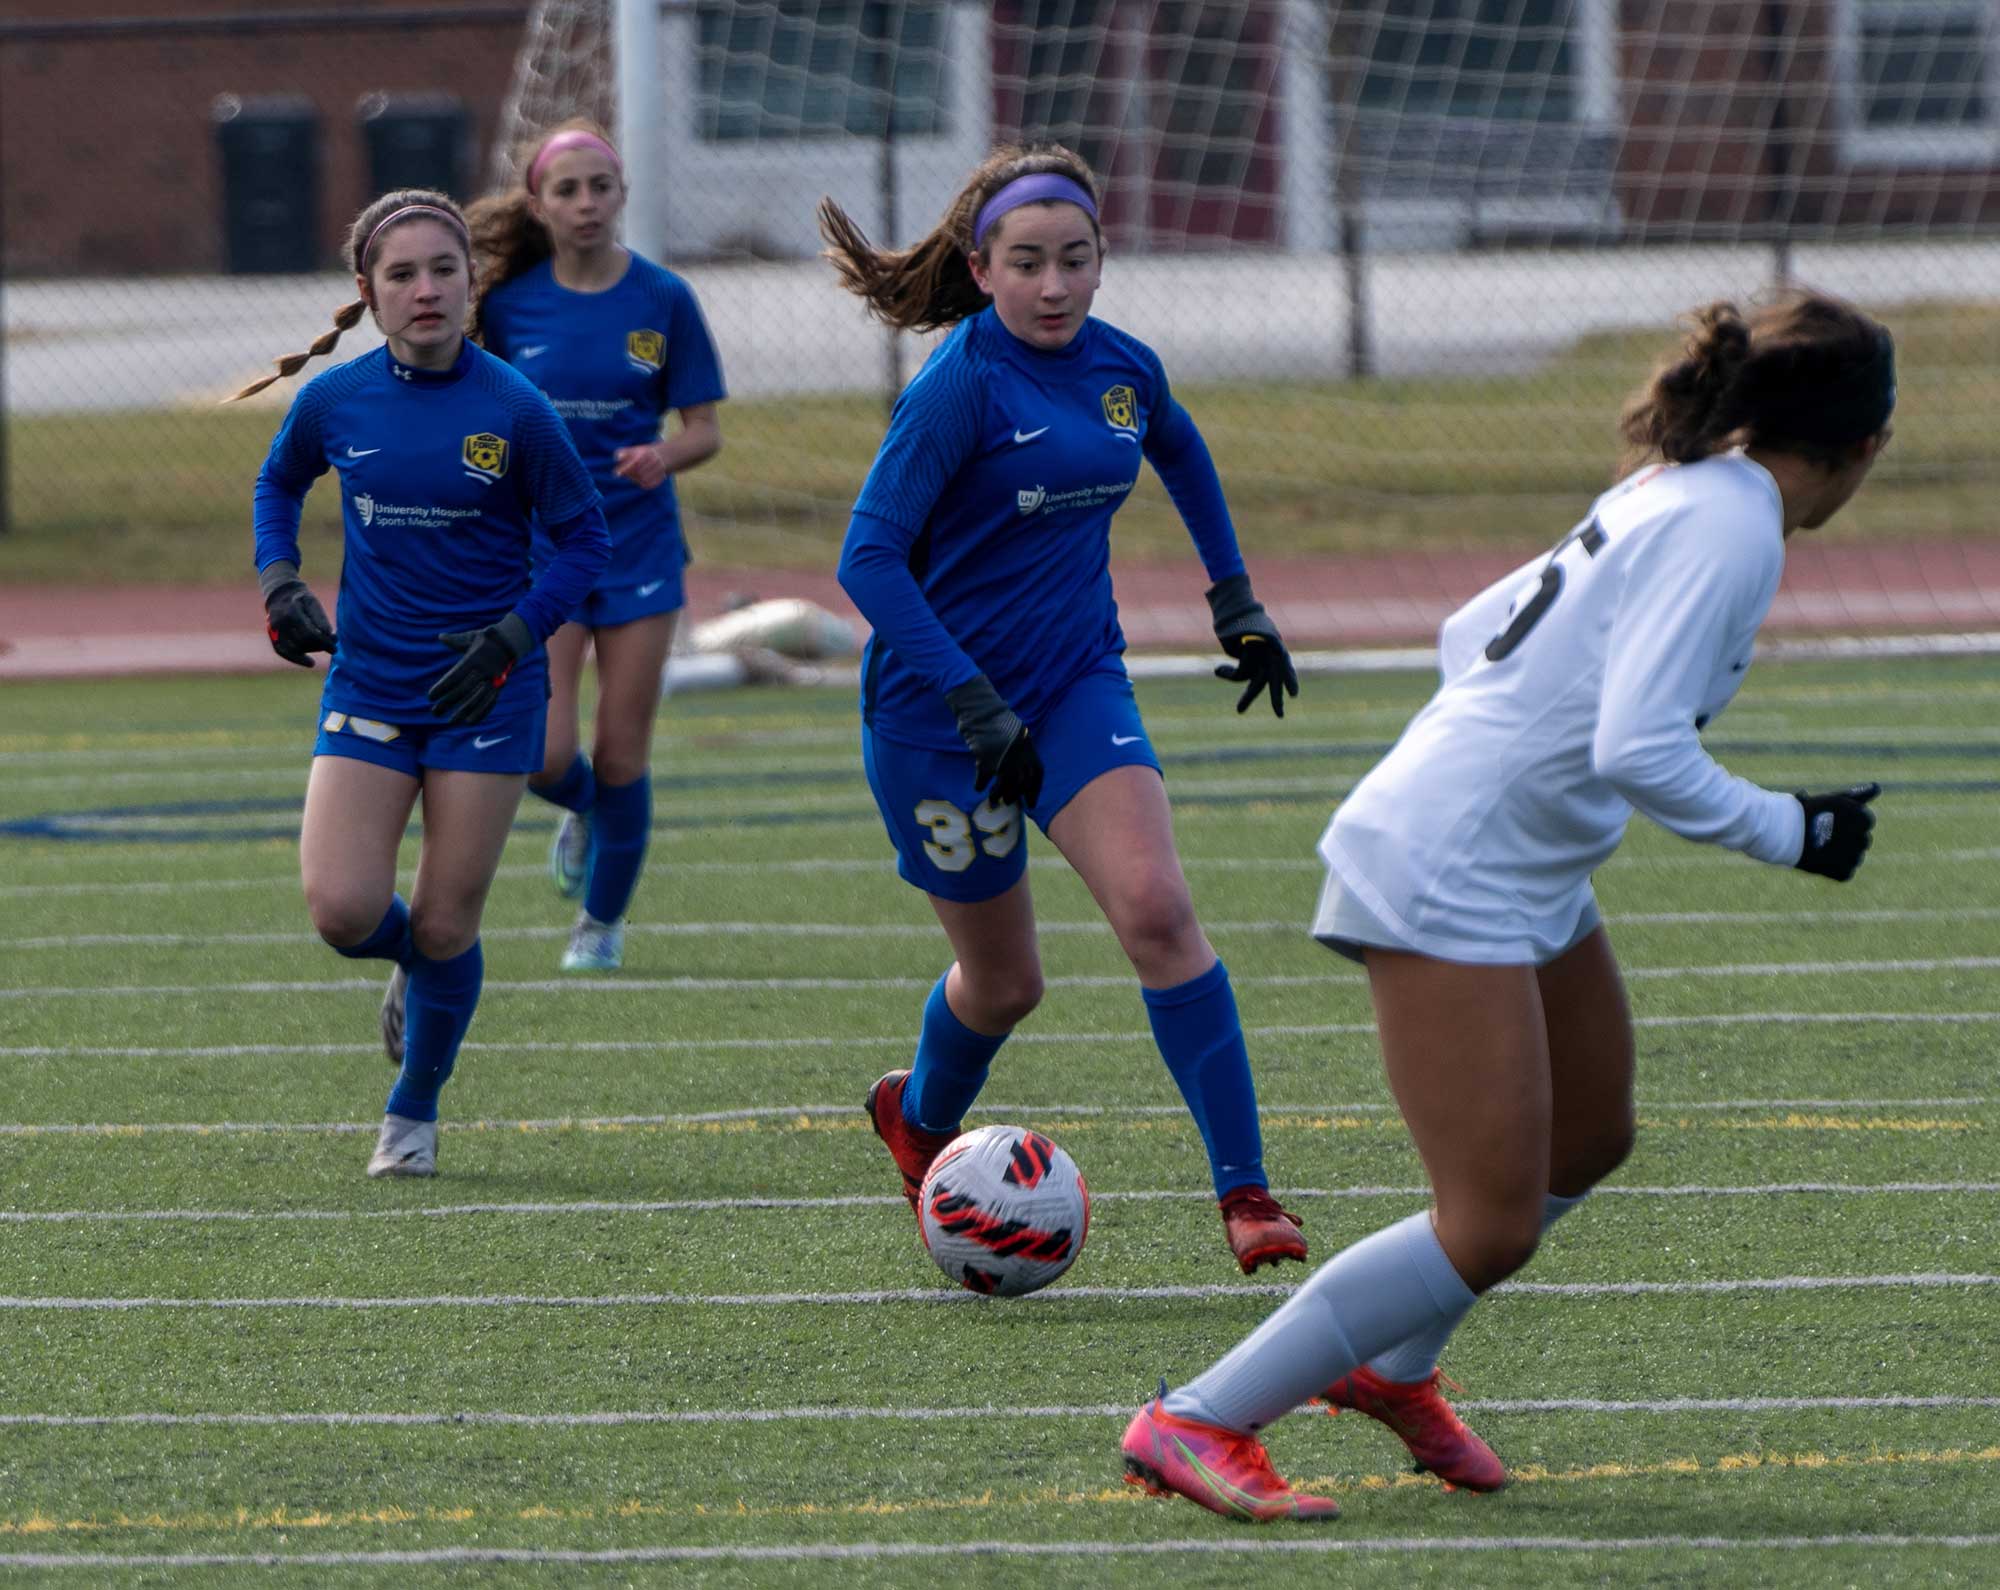 Cleveland Force Soccer Photography services